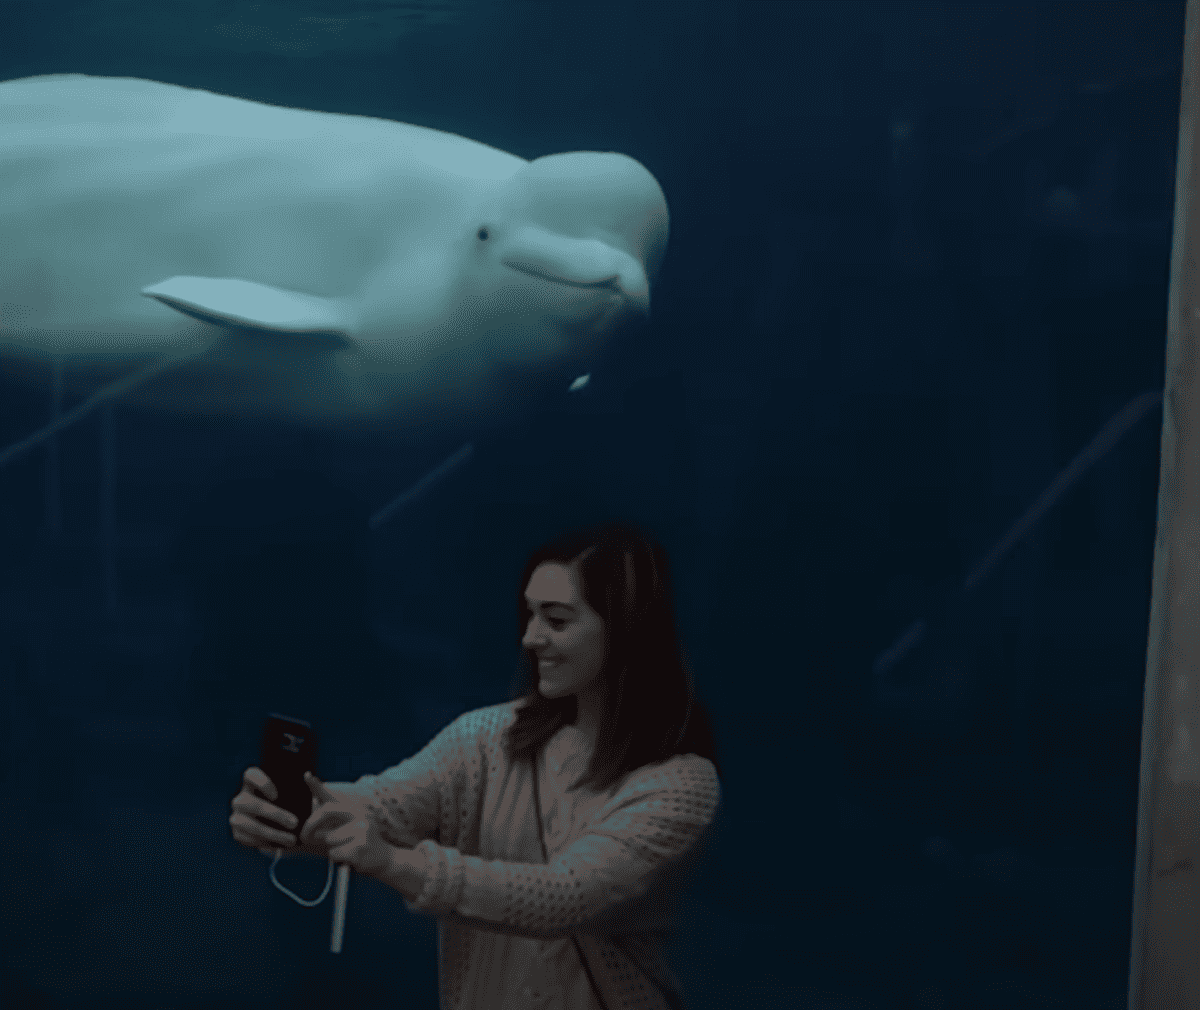 Fascination with Human Tricks in Aquariums